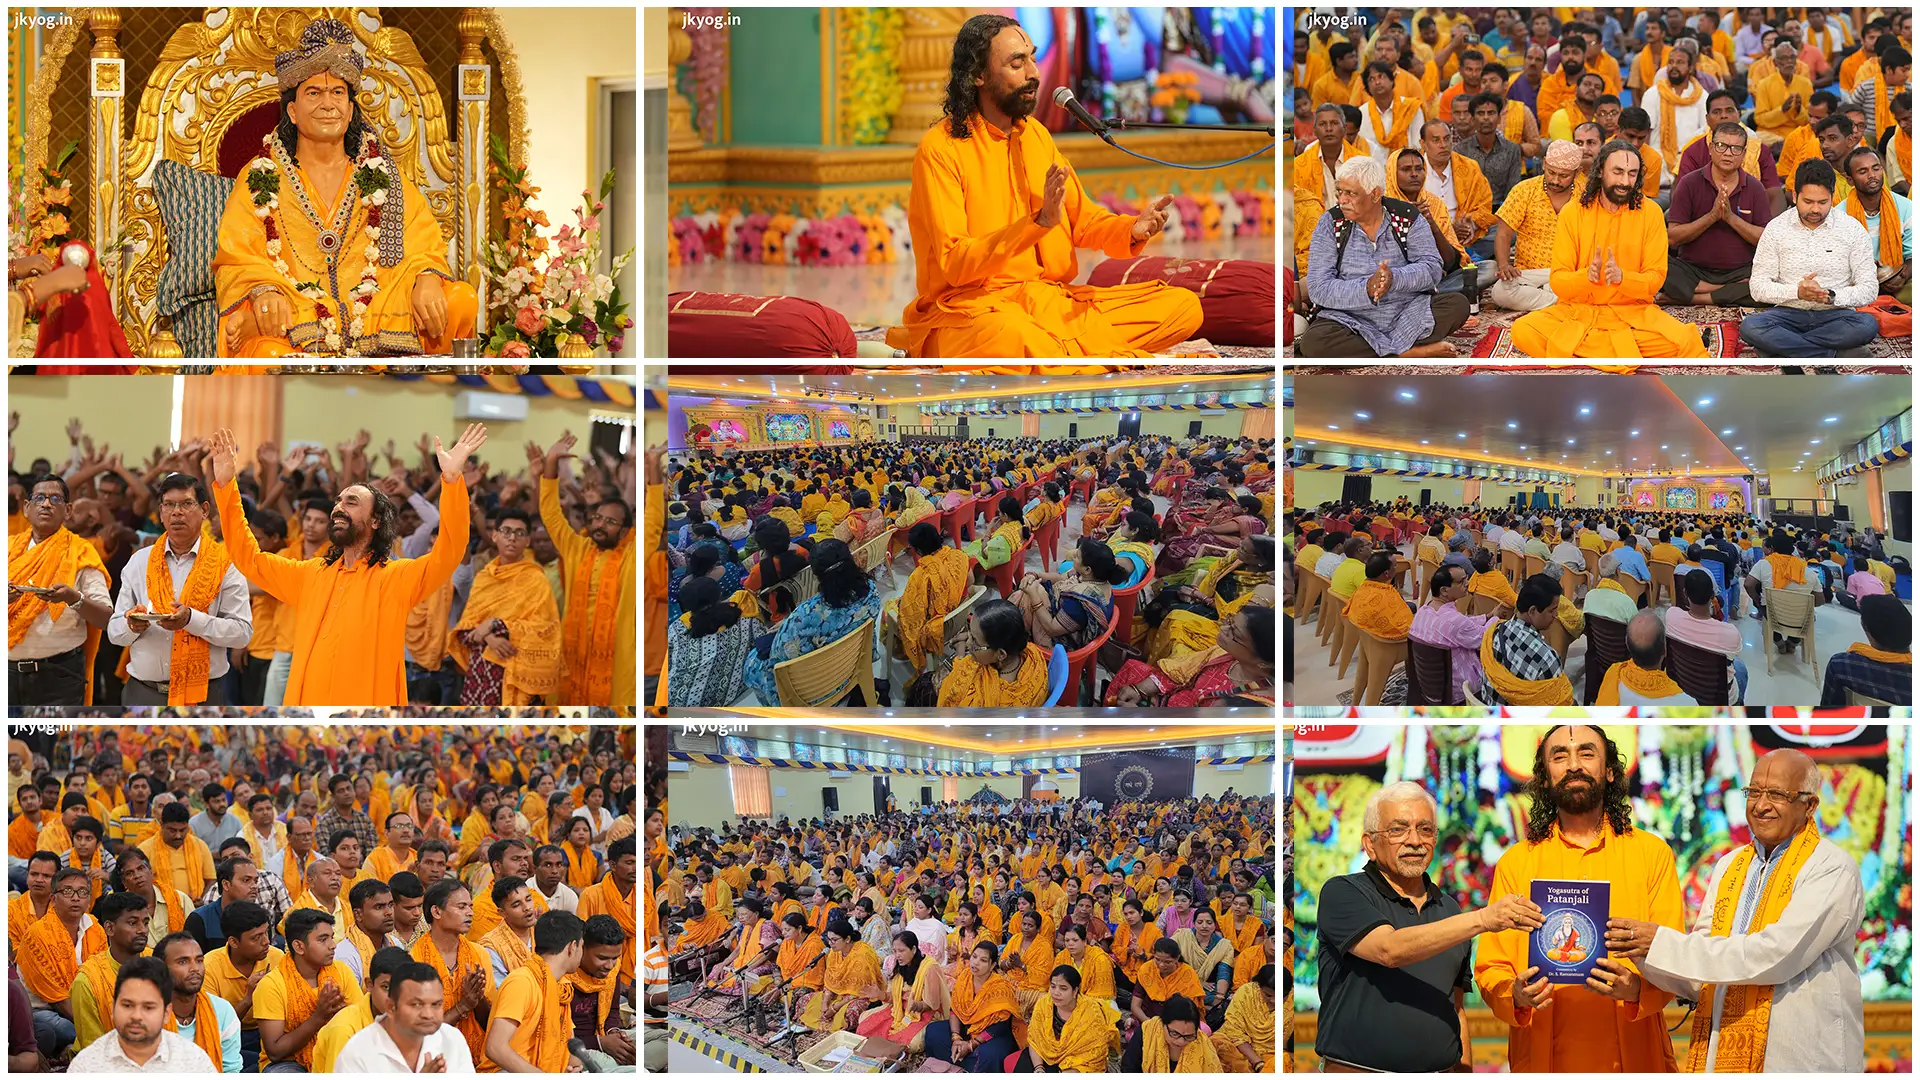 Satsang with Swami Mukundananda: A Confluence of Devotees and Spiritual Insights